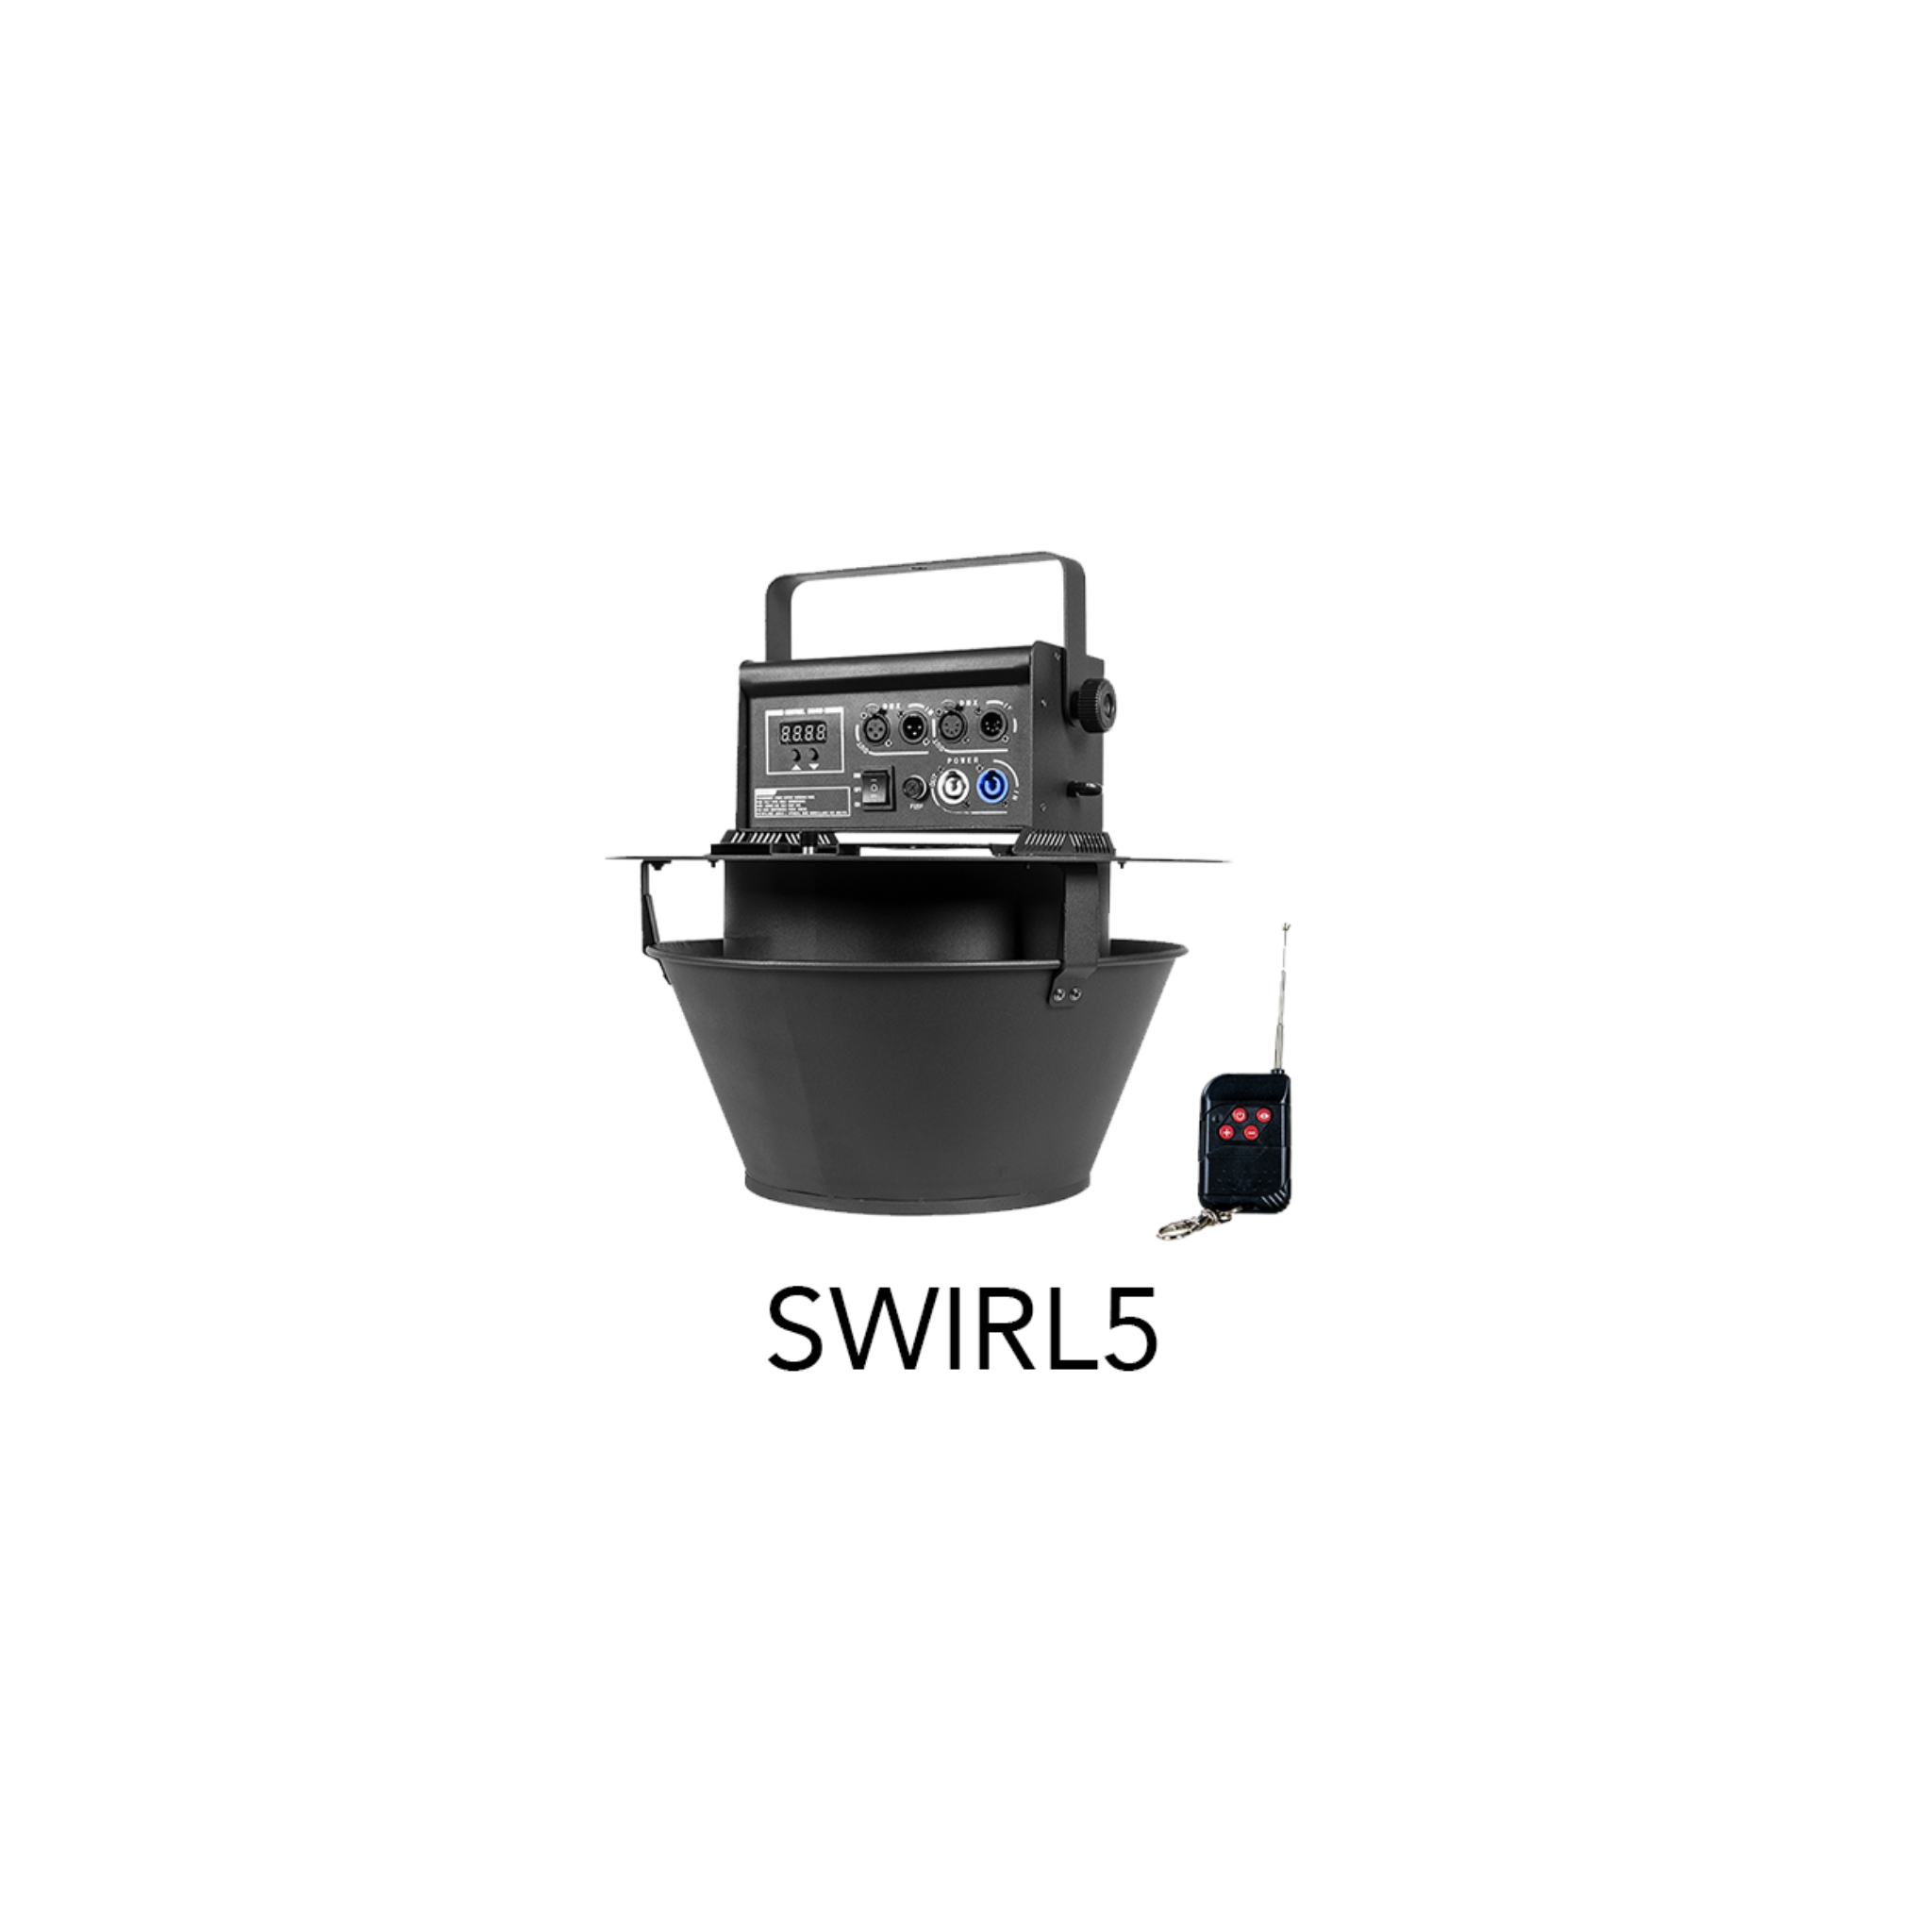 SWIRL5 Hanging Confetti Blower | Event Lighting | Now Available